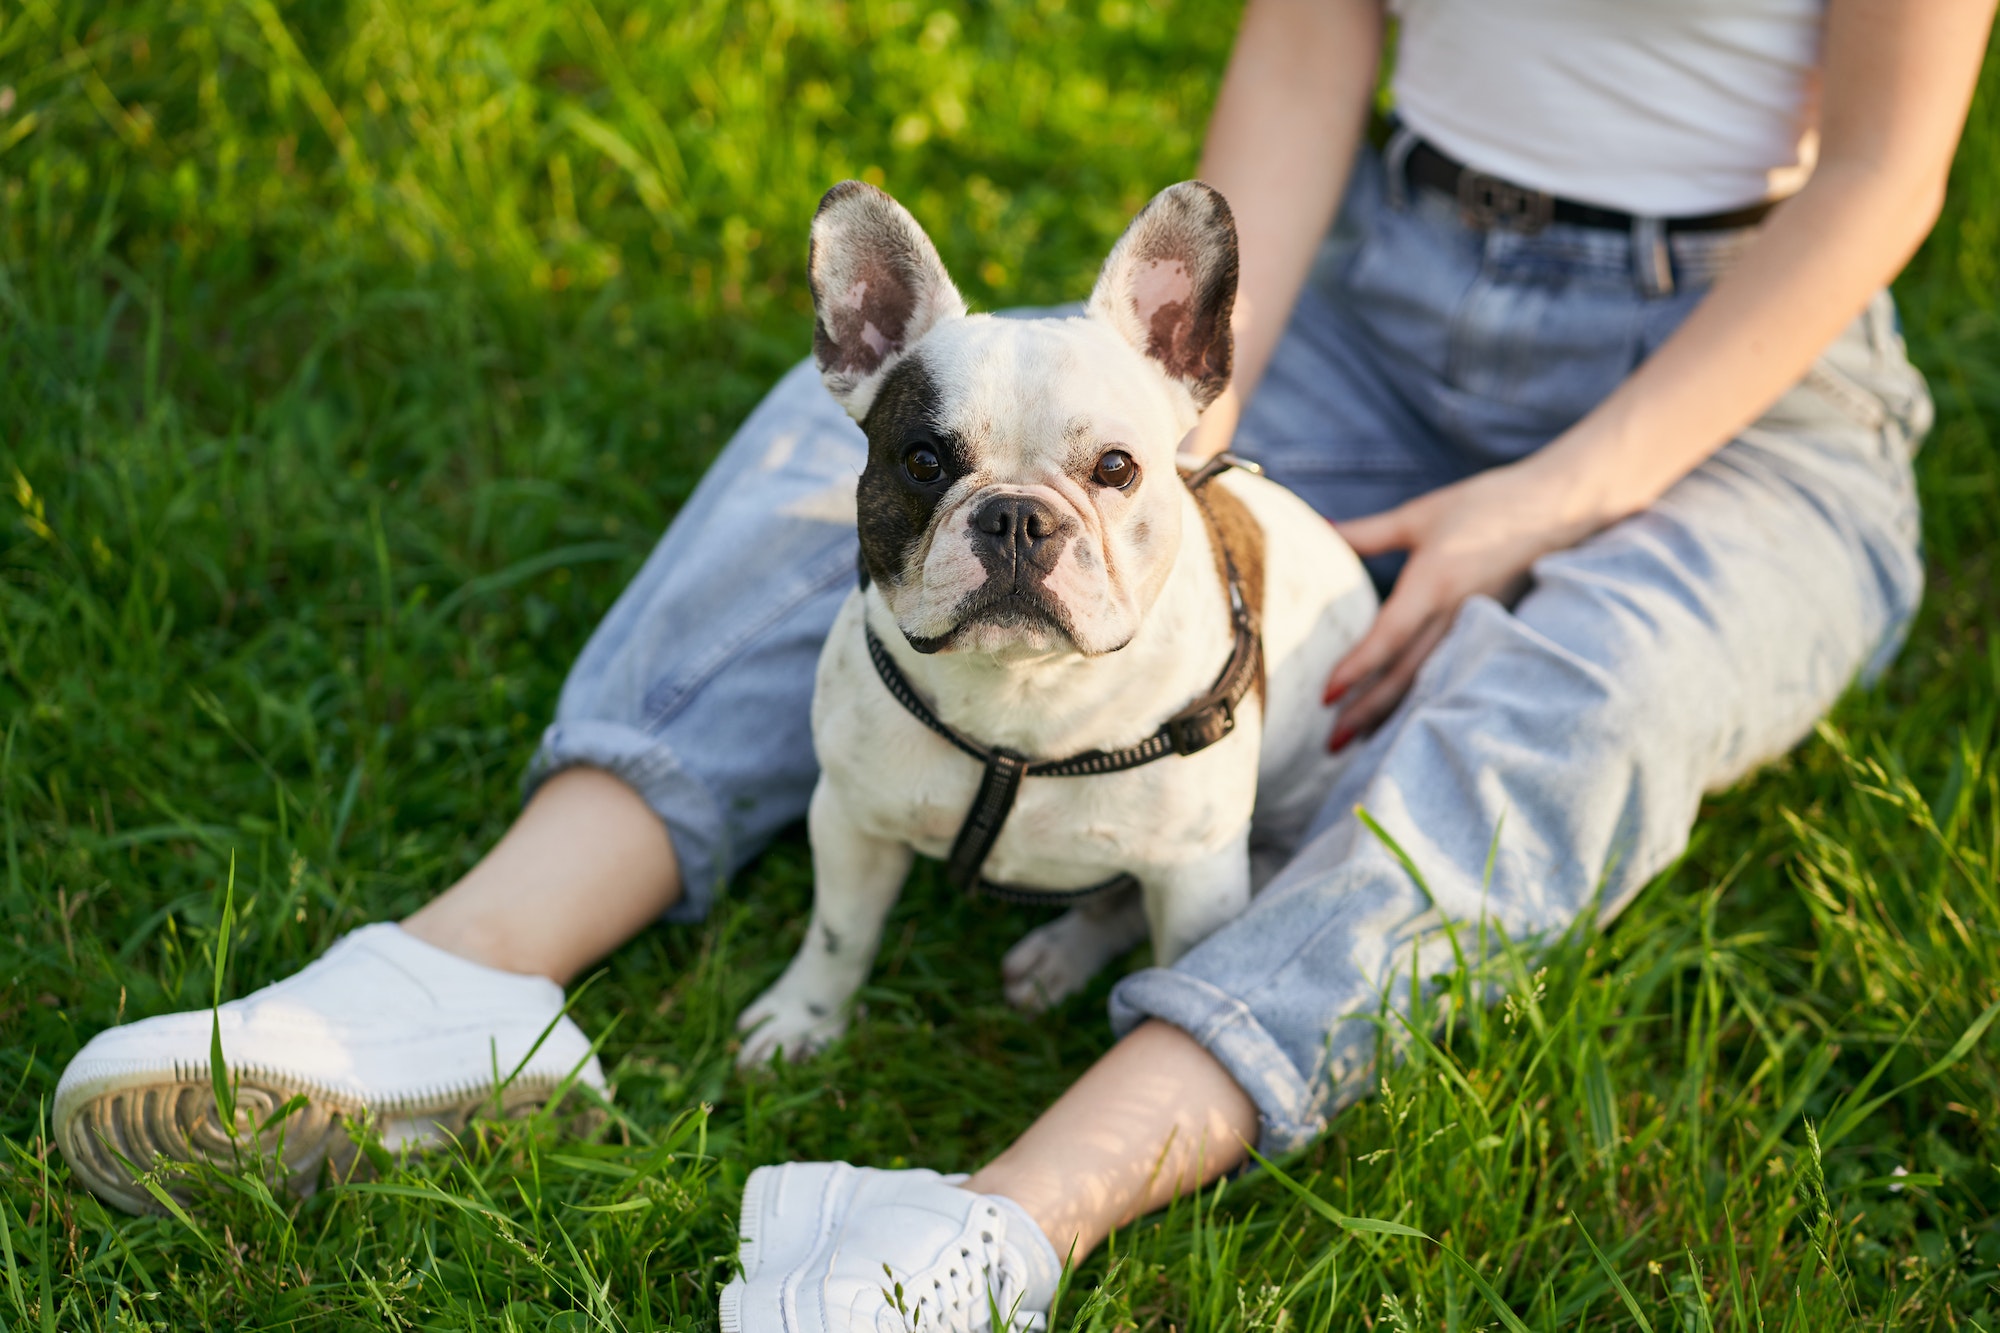 French bulldog enjoying time with owner in park.